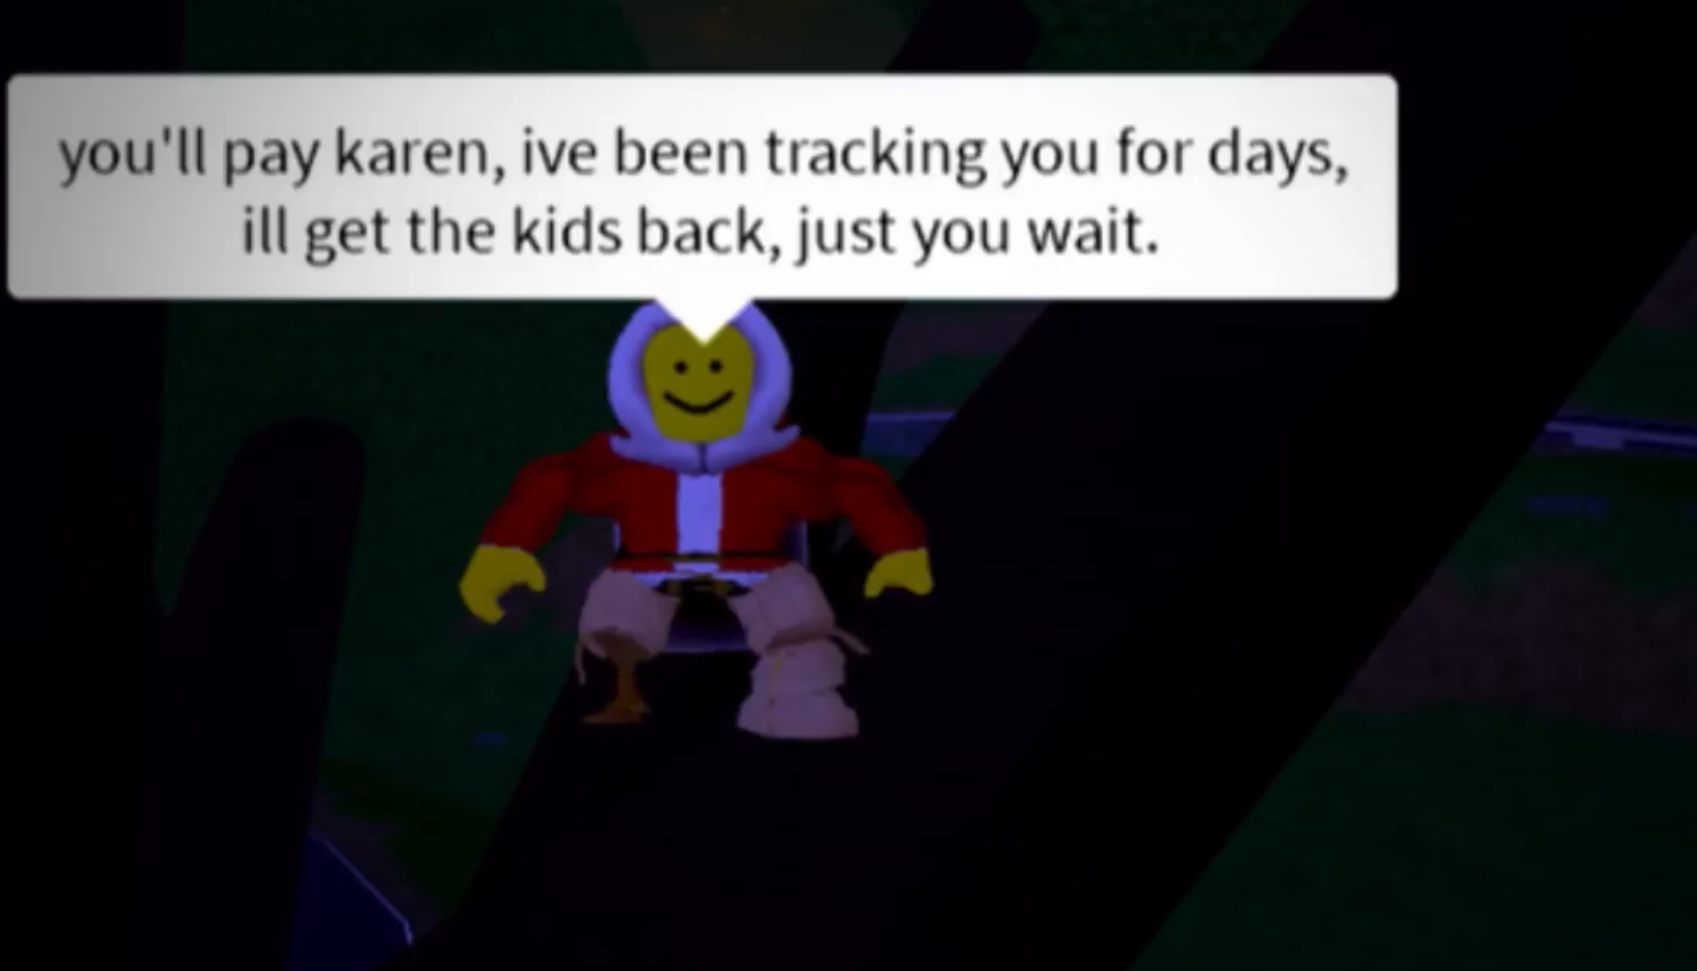 Teens - Roblox Funny Jokes, Memes, Pictures, & Stories - Livebrary.com -  OverDrive